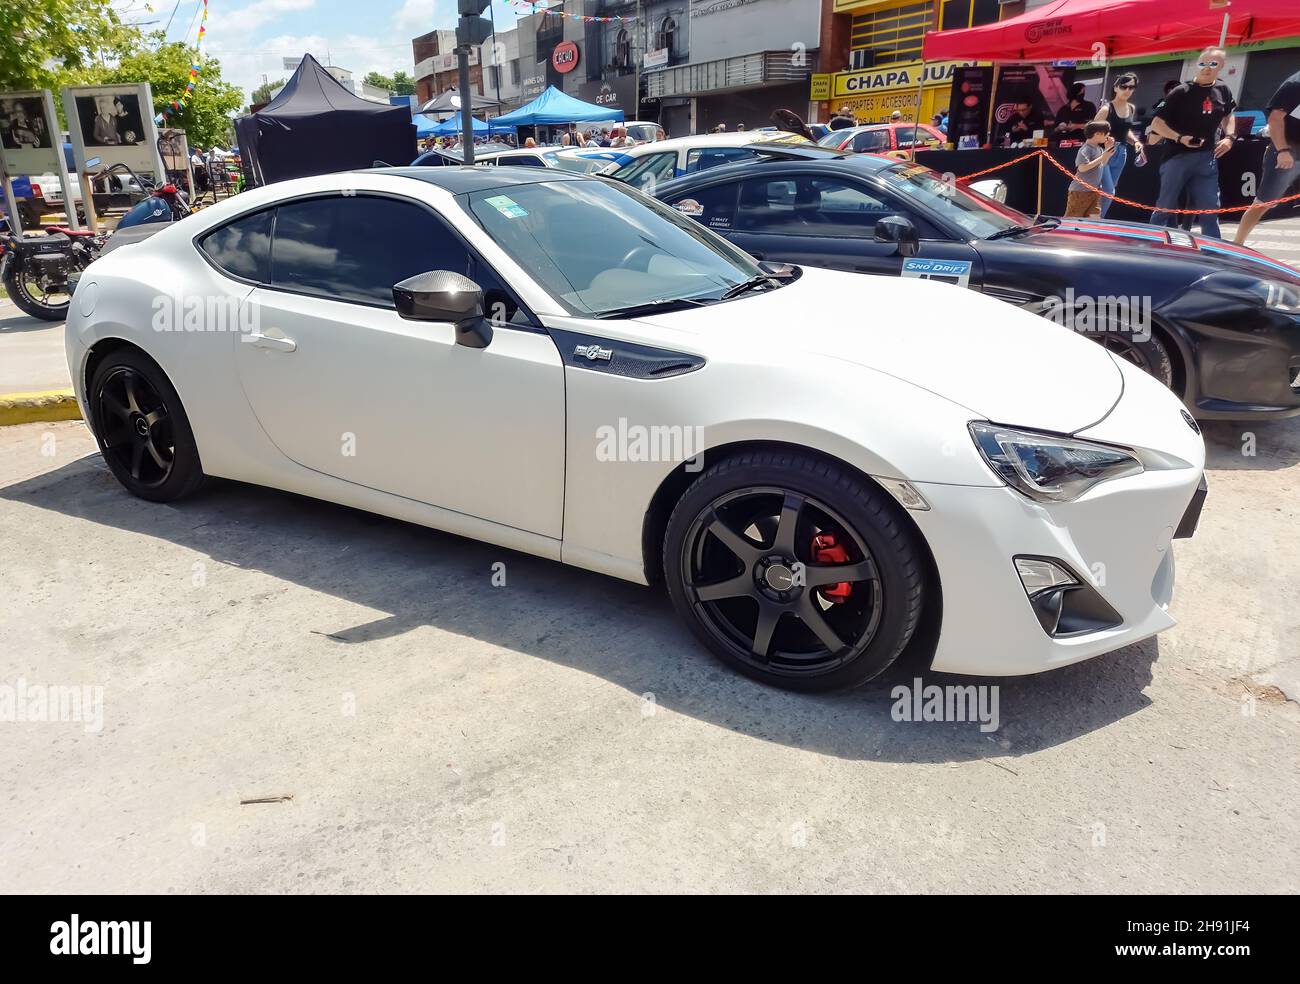 BUENOS AIRES, ARGENTINA - Nov 08, 2021: Shot of a sporty white coupe Toyota GT 86 - Subaru BRZ - Scion FRS. Expo Warnes 2021 classic car show. Stock Photo